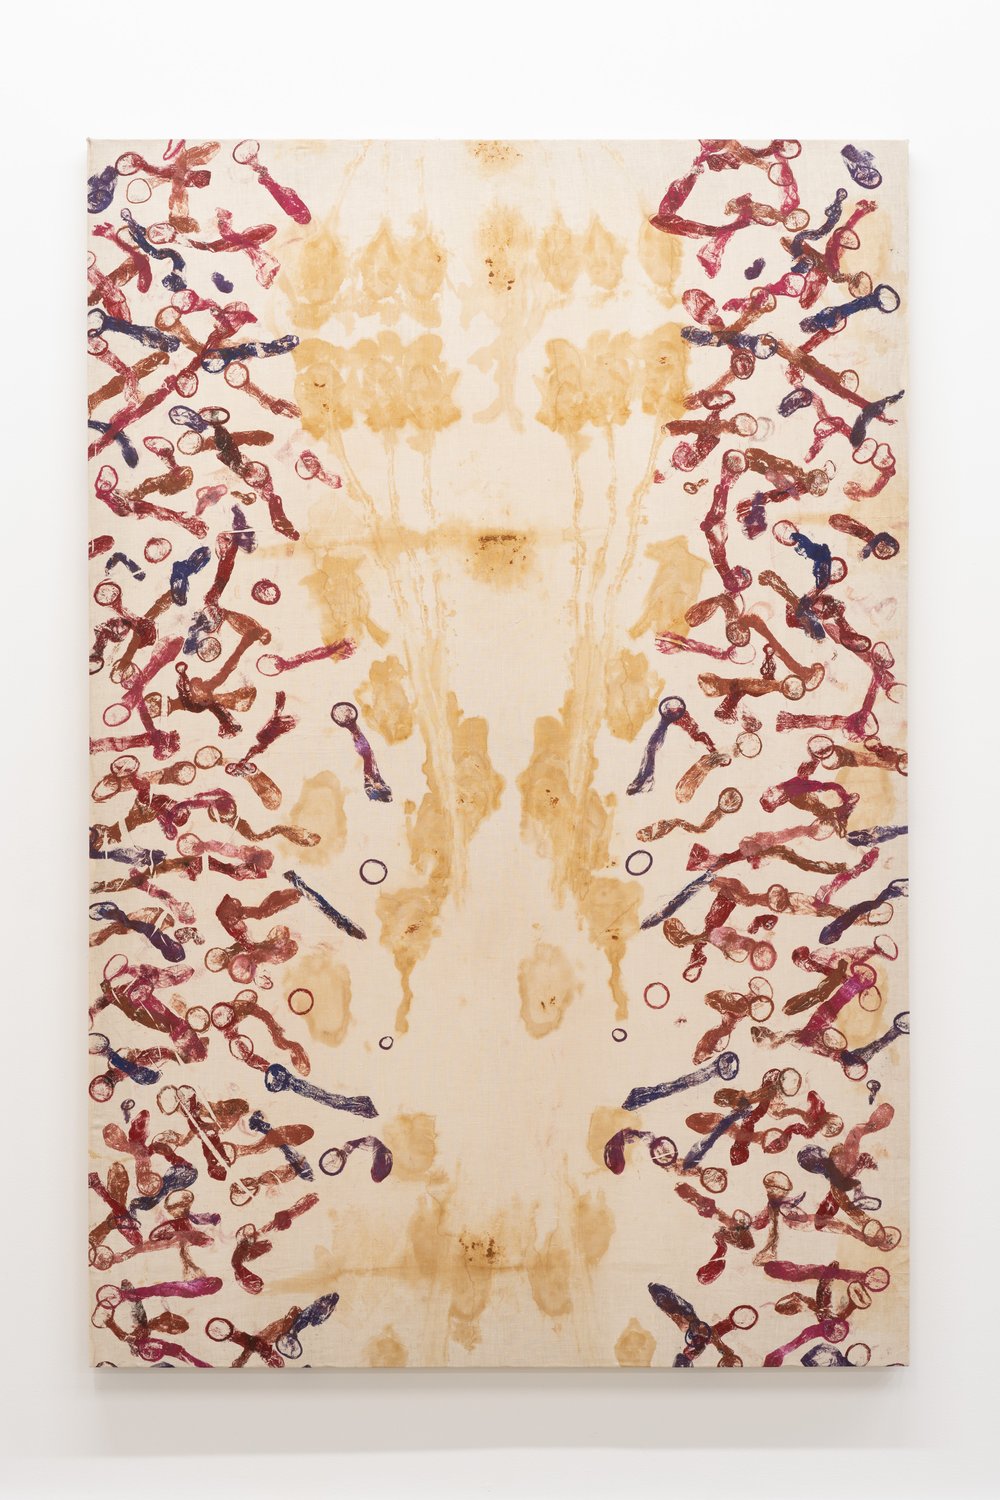  Chrysanne Stathacos,  Condom Roses , 1991. Oil on portrait linen with rose blood, 72 x 48 inches. Courtesy of the artist and The Breeder, Athens. Photo: Nando Alvarez-Perez 